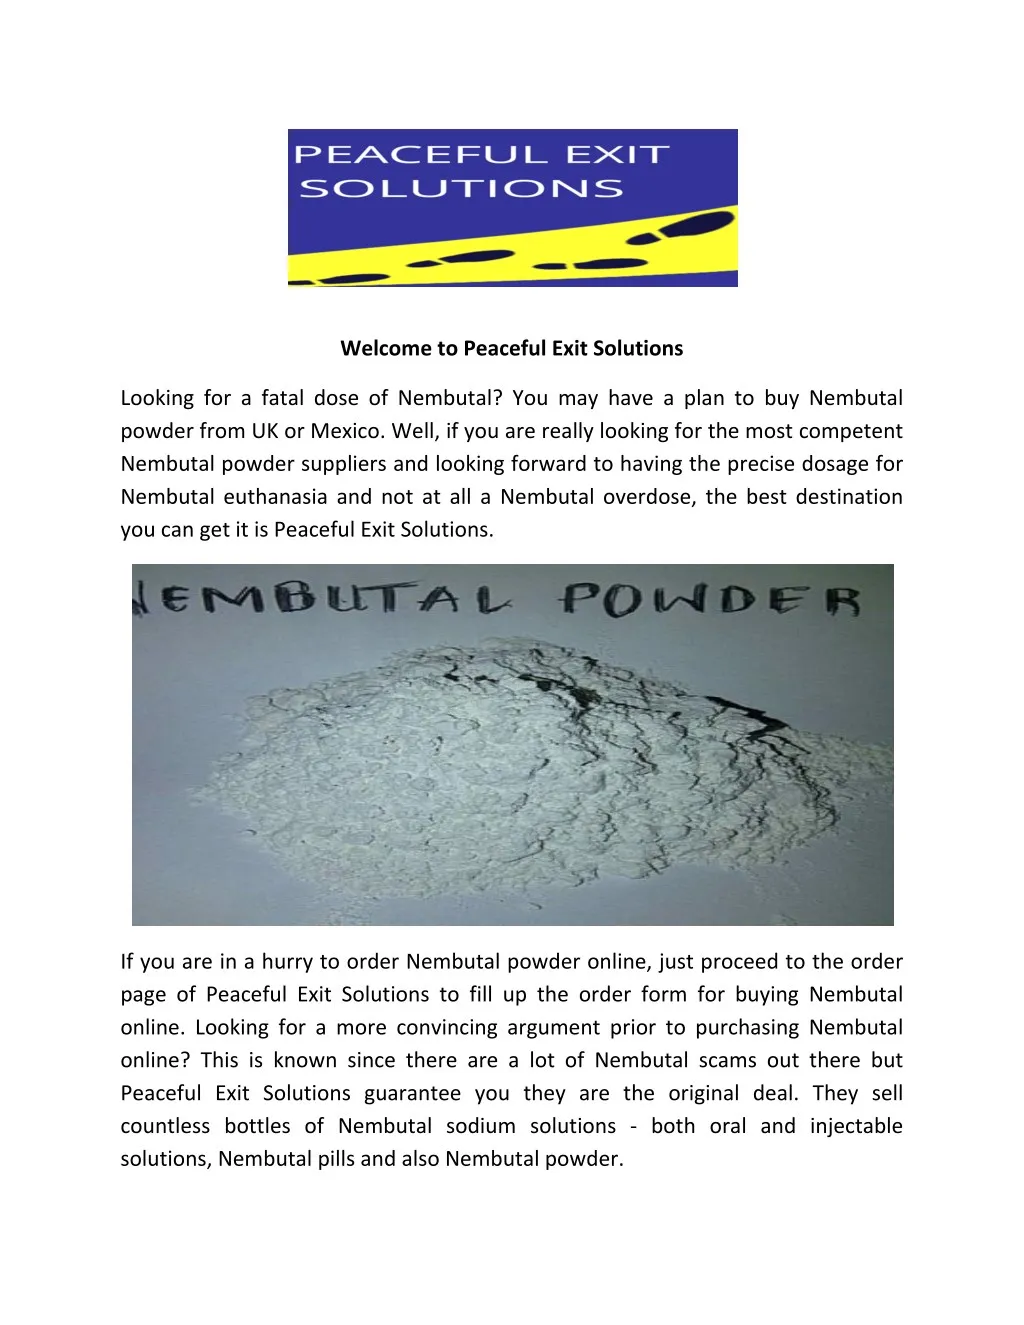 welcome to peaceful exit solutions